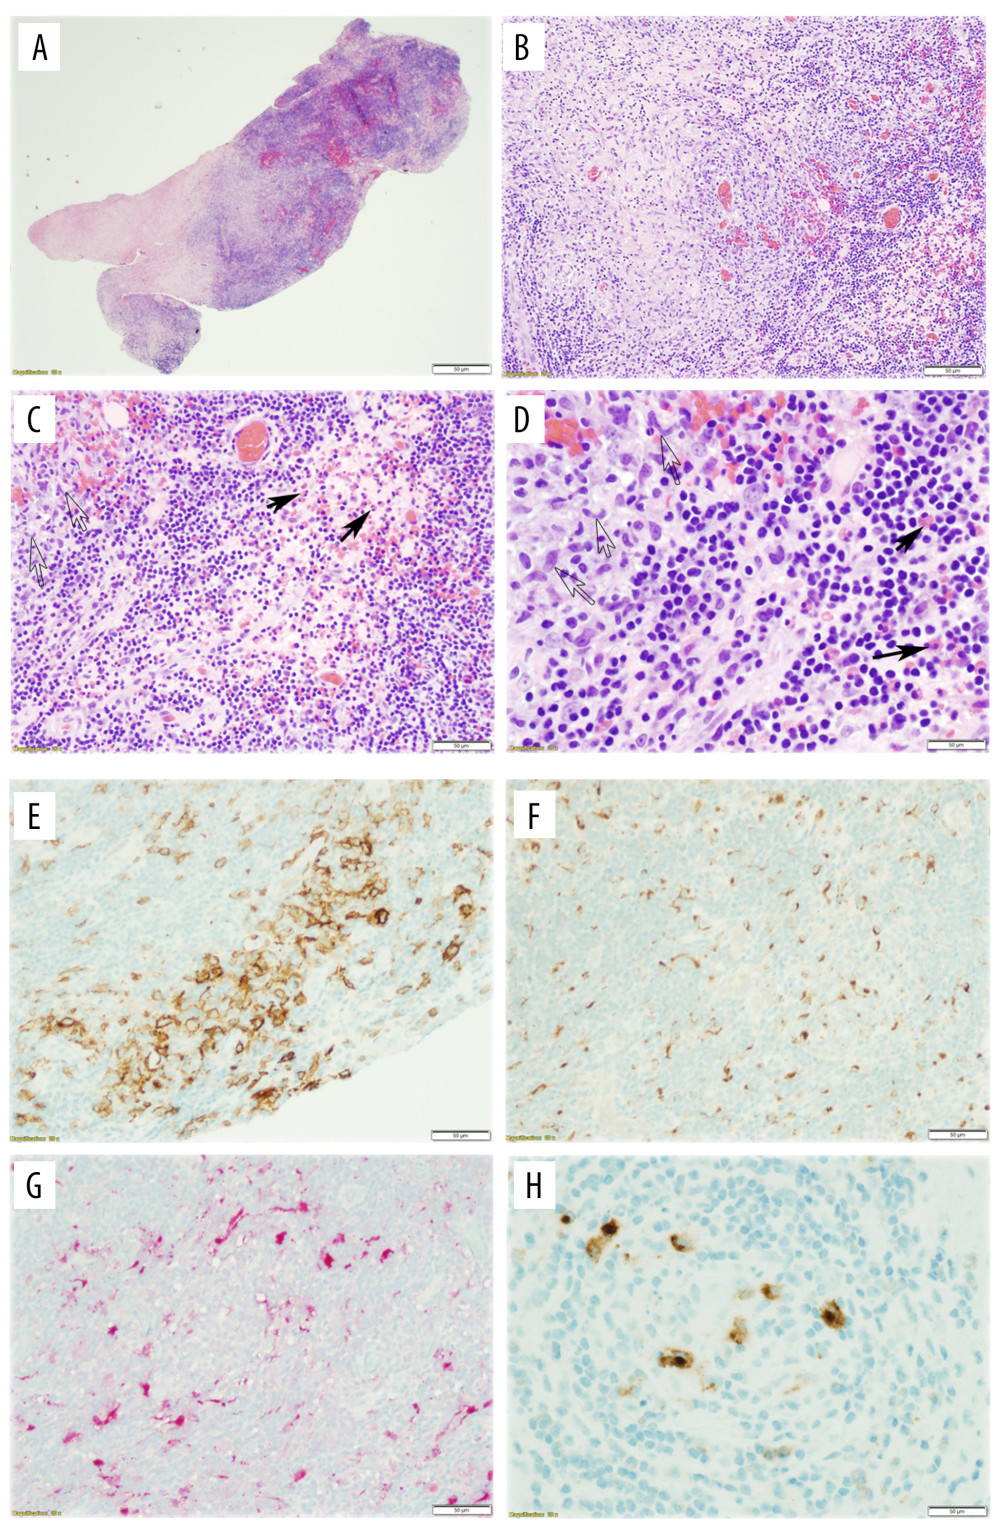 Pathologic features of LCH. (A–D) H&E stains at different magnifications demonstrated brain parenchyma diffusely infiltrated by histocytes (hollow arrows; C, D) surrounded by extensive lymphoplasmacytic cells and abundant eosinophils (black arrows; C, D). The enlarged histocytes had abundant pale eosinophilic cytoplasm, elongated bean-shaped nuclei, distinct nucleoli, and nuclear grooves. (A: 20×; B: 100×; C: 200×; D: 400×). Histiocytes showed CD1a (E), CD68 (F), and S100 (G) positivity, as well as Langerin focally positivity (H).